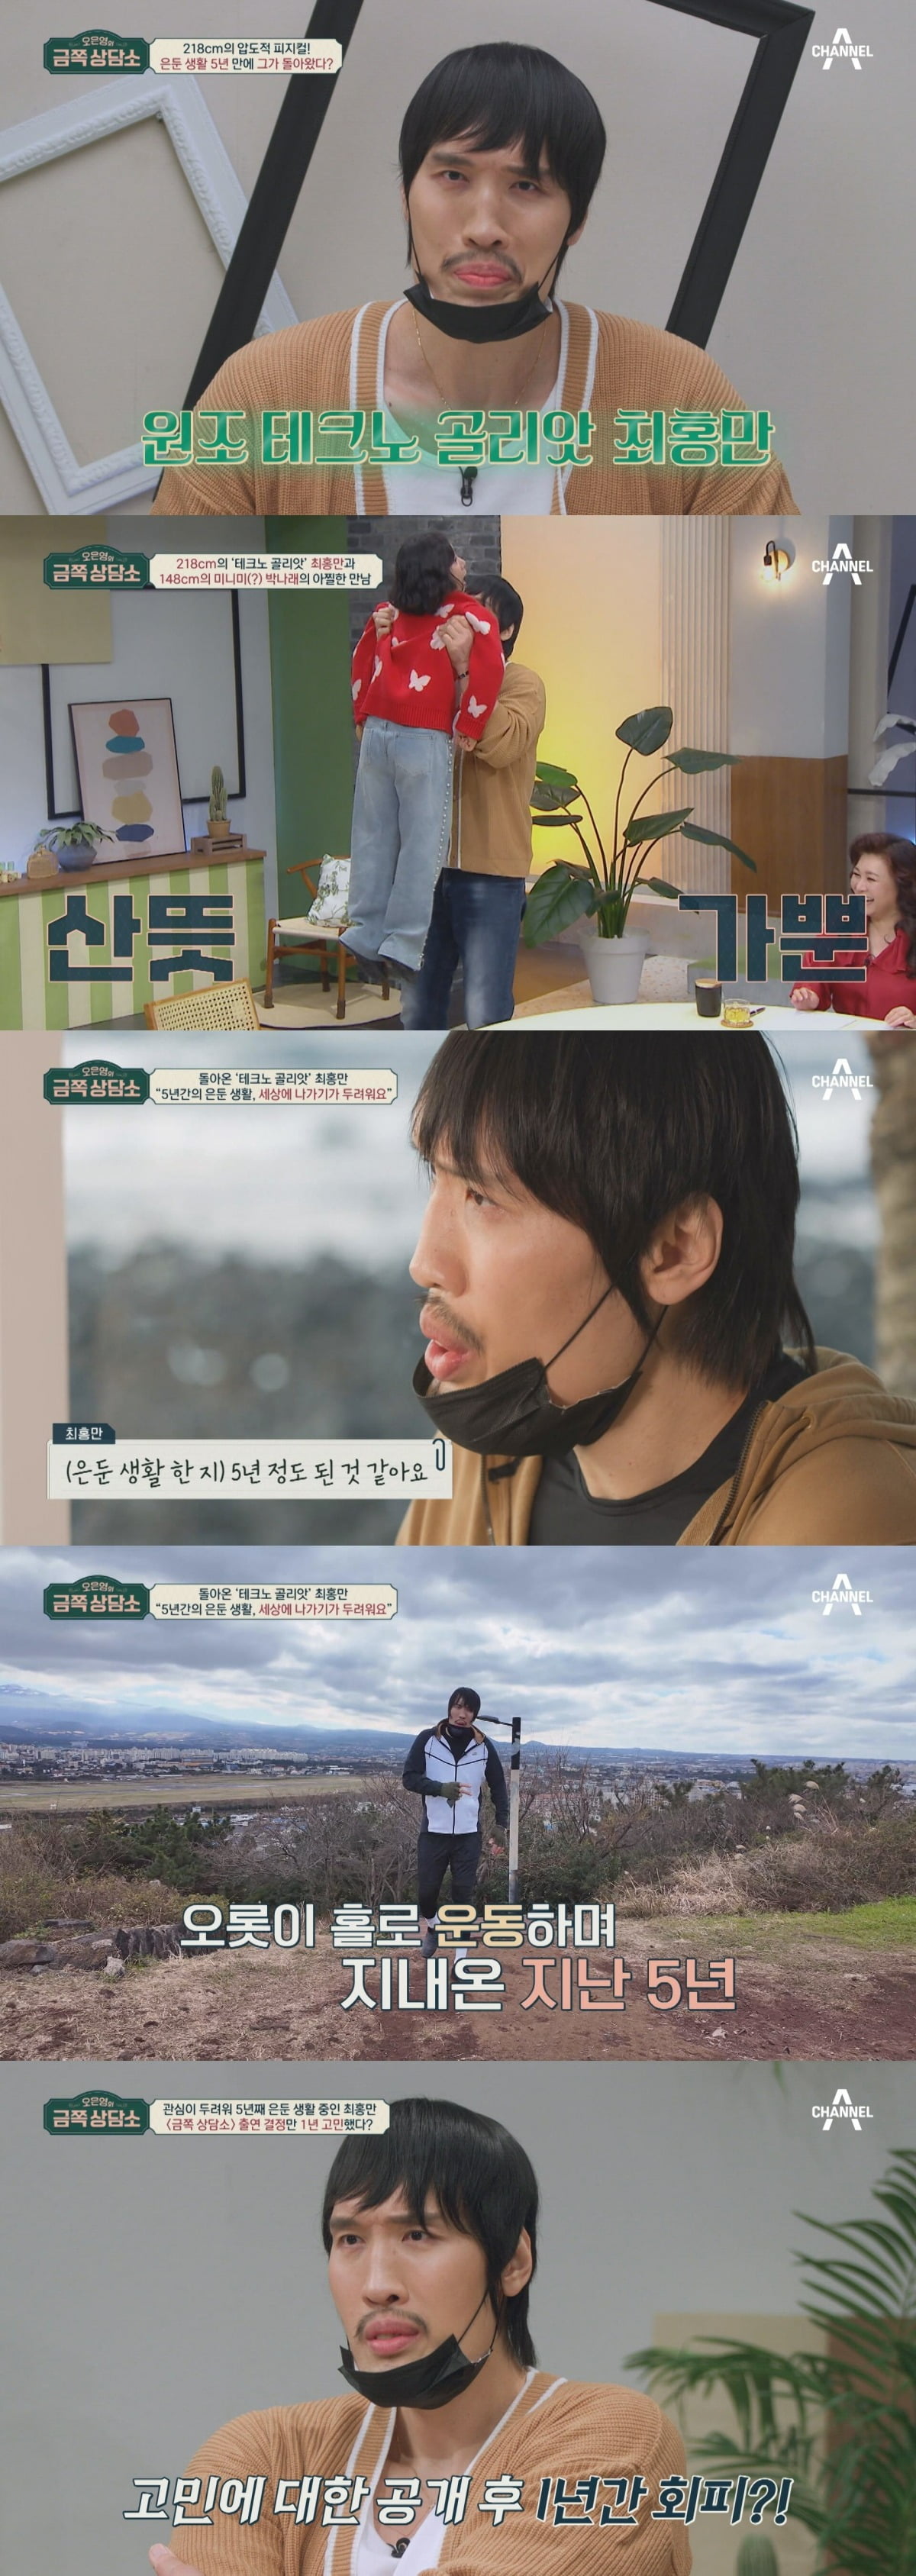 Choi Hong-man, living in seclusion for 5 years, "I'm afraid to go out into the world"